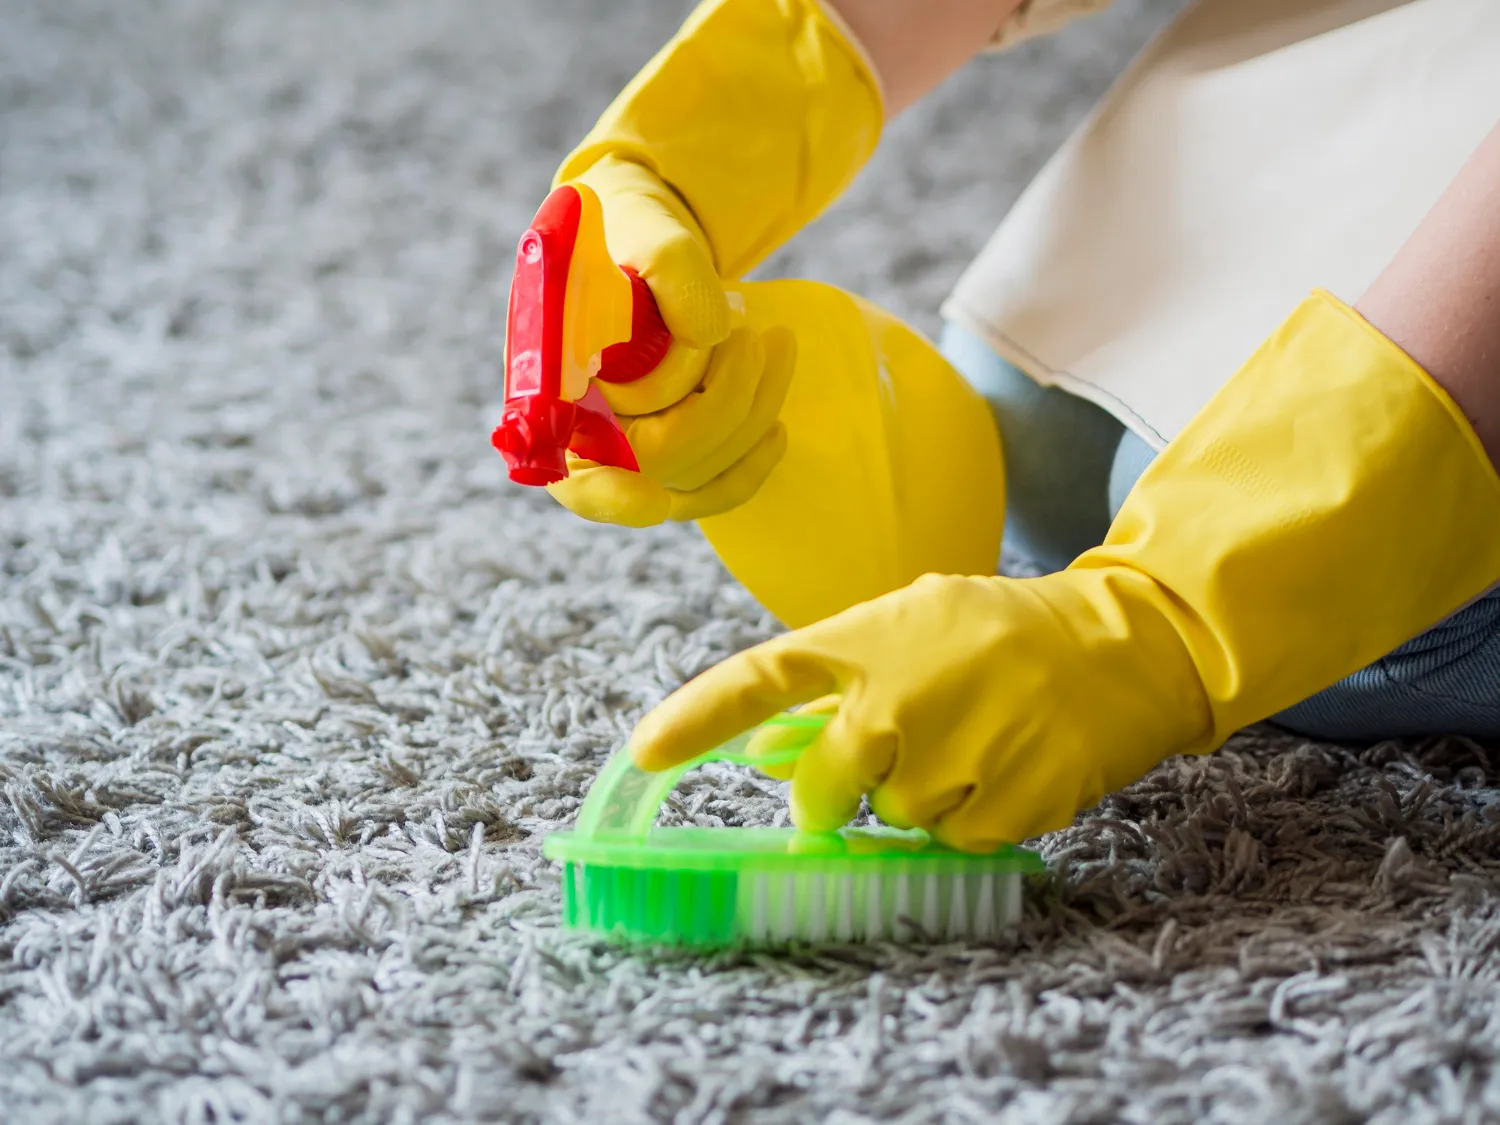 Rug Cleaning Tips for the Spring Season